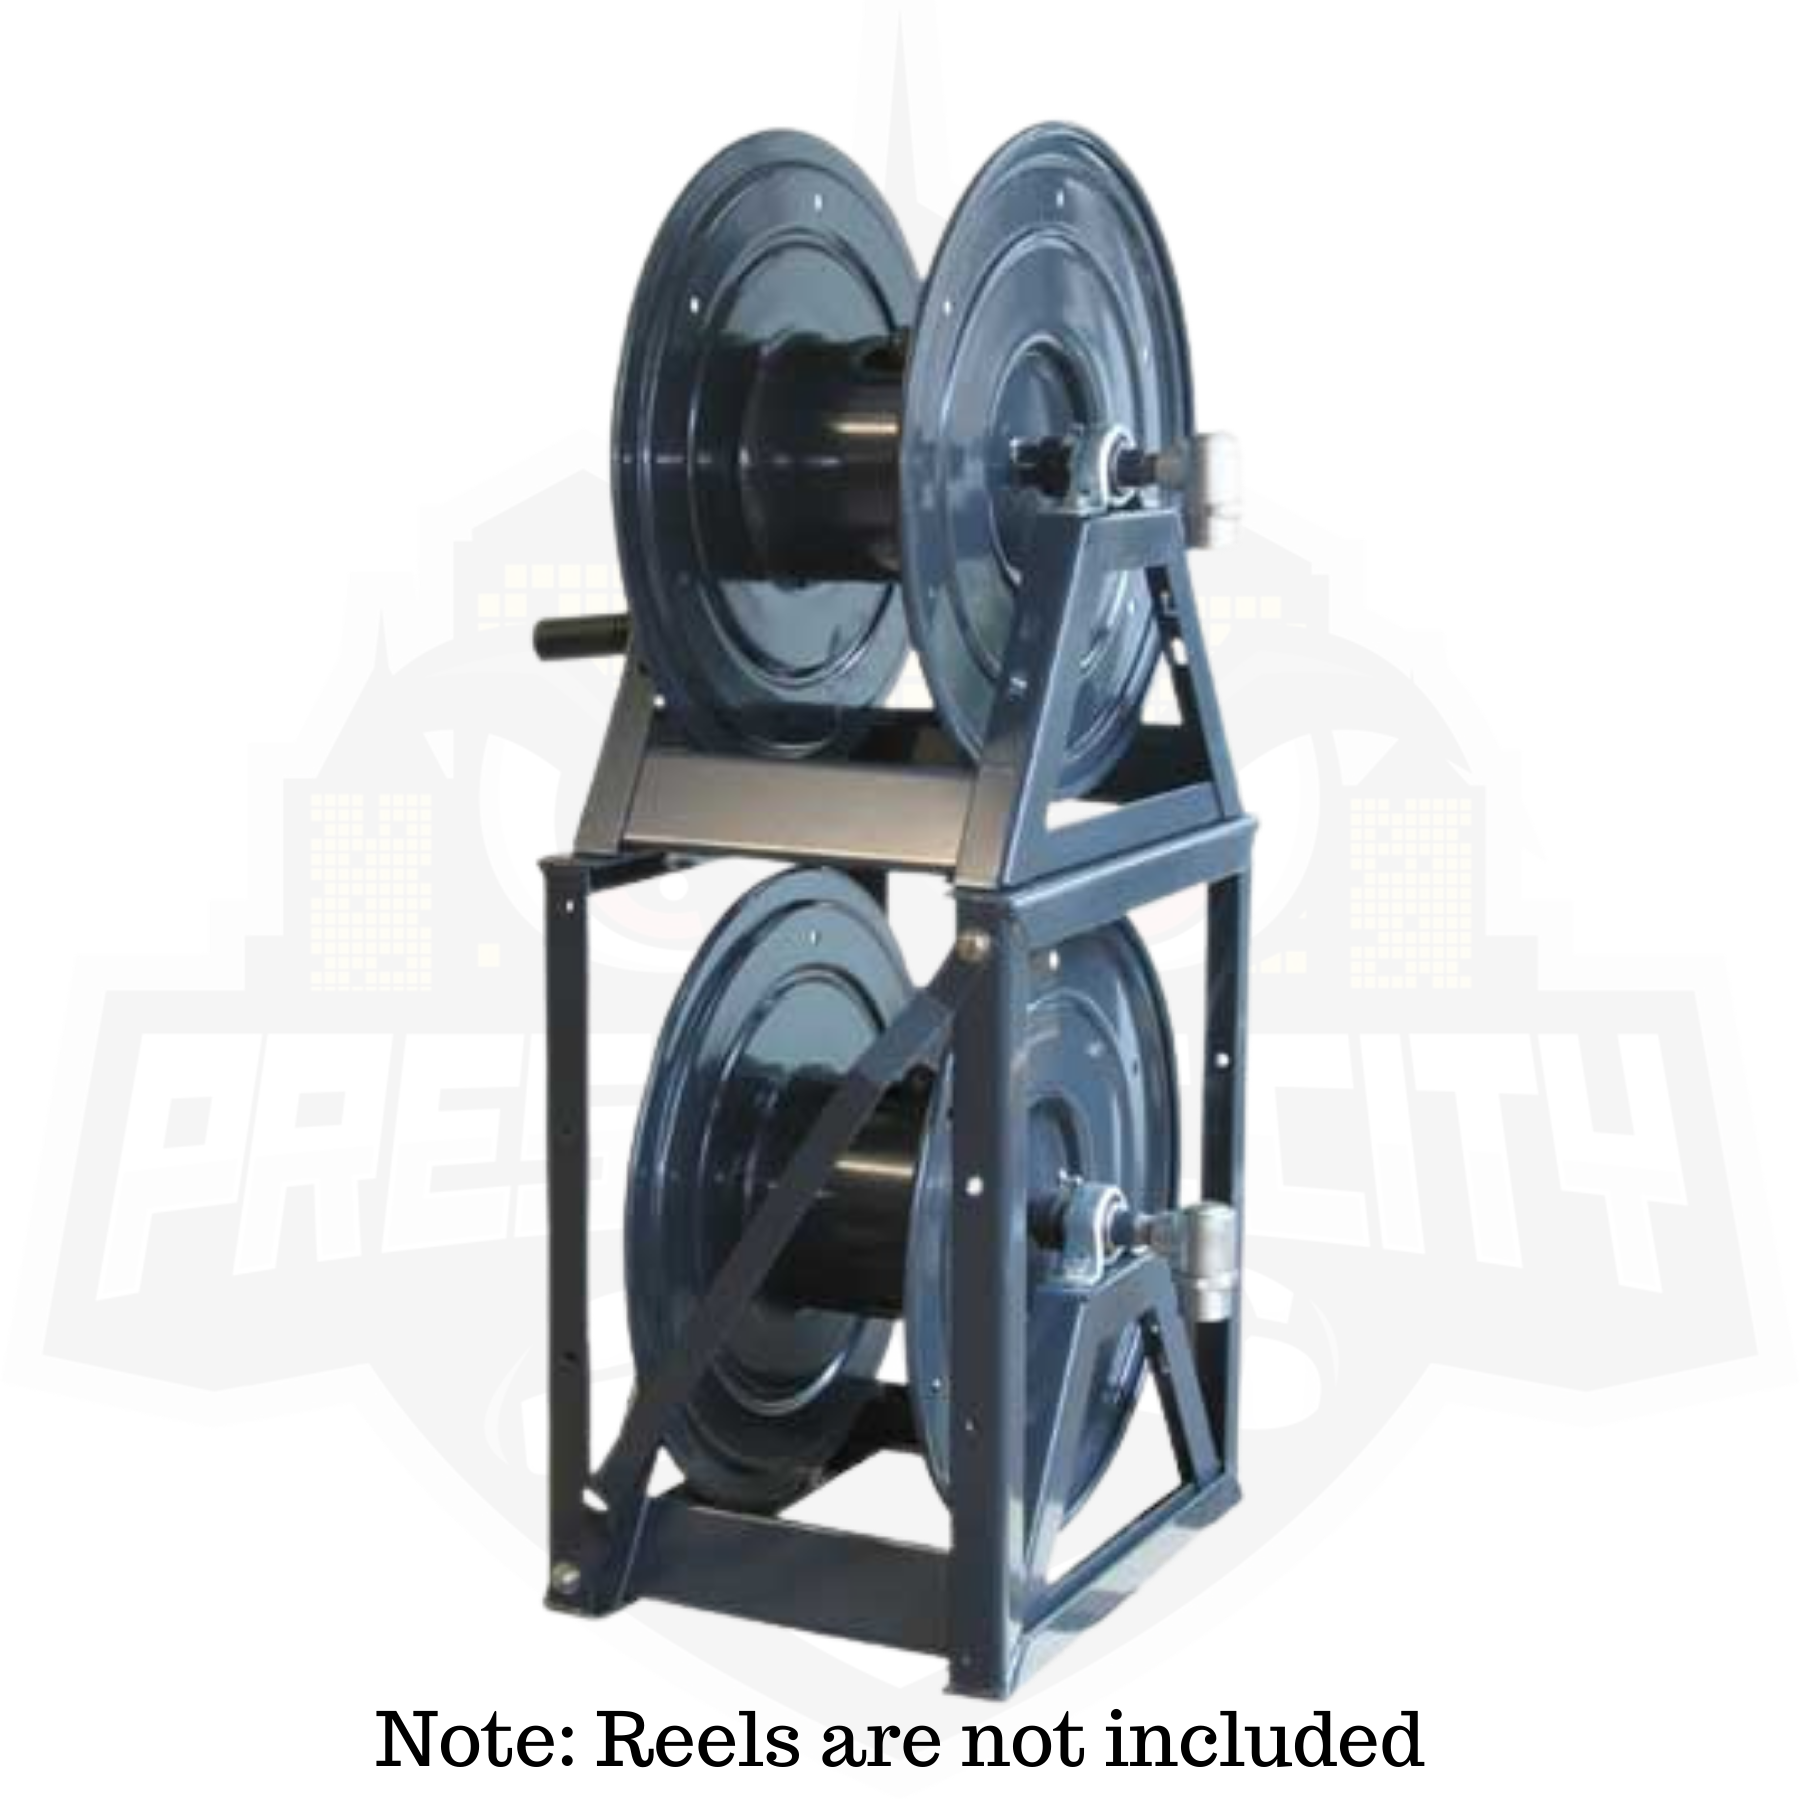 General Pump DHRA50300 12 x 300' Charcoal Grey Steel Hose Reel with Flat  Sidewalls, A-frame, Pin Lock and Brake and Stainless Steel Swivel Inlet